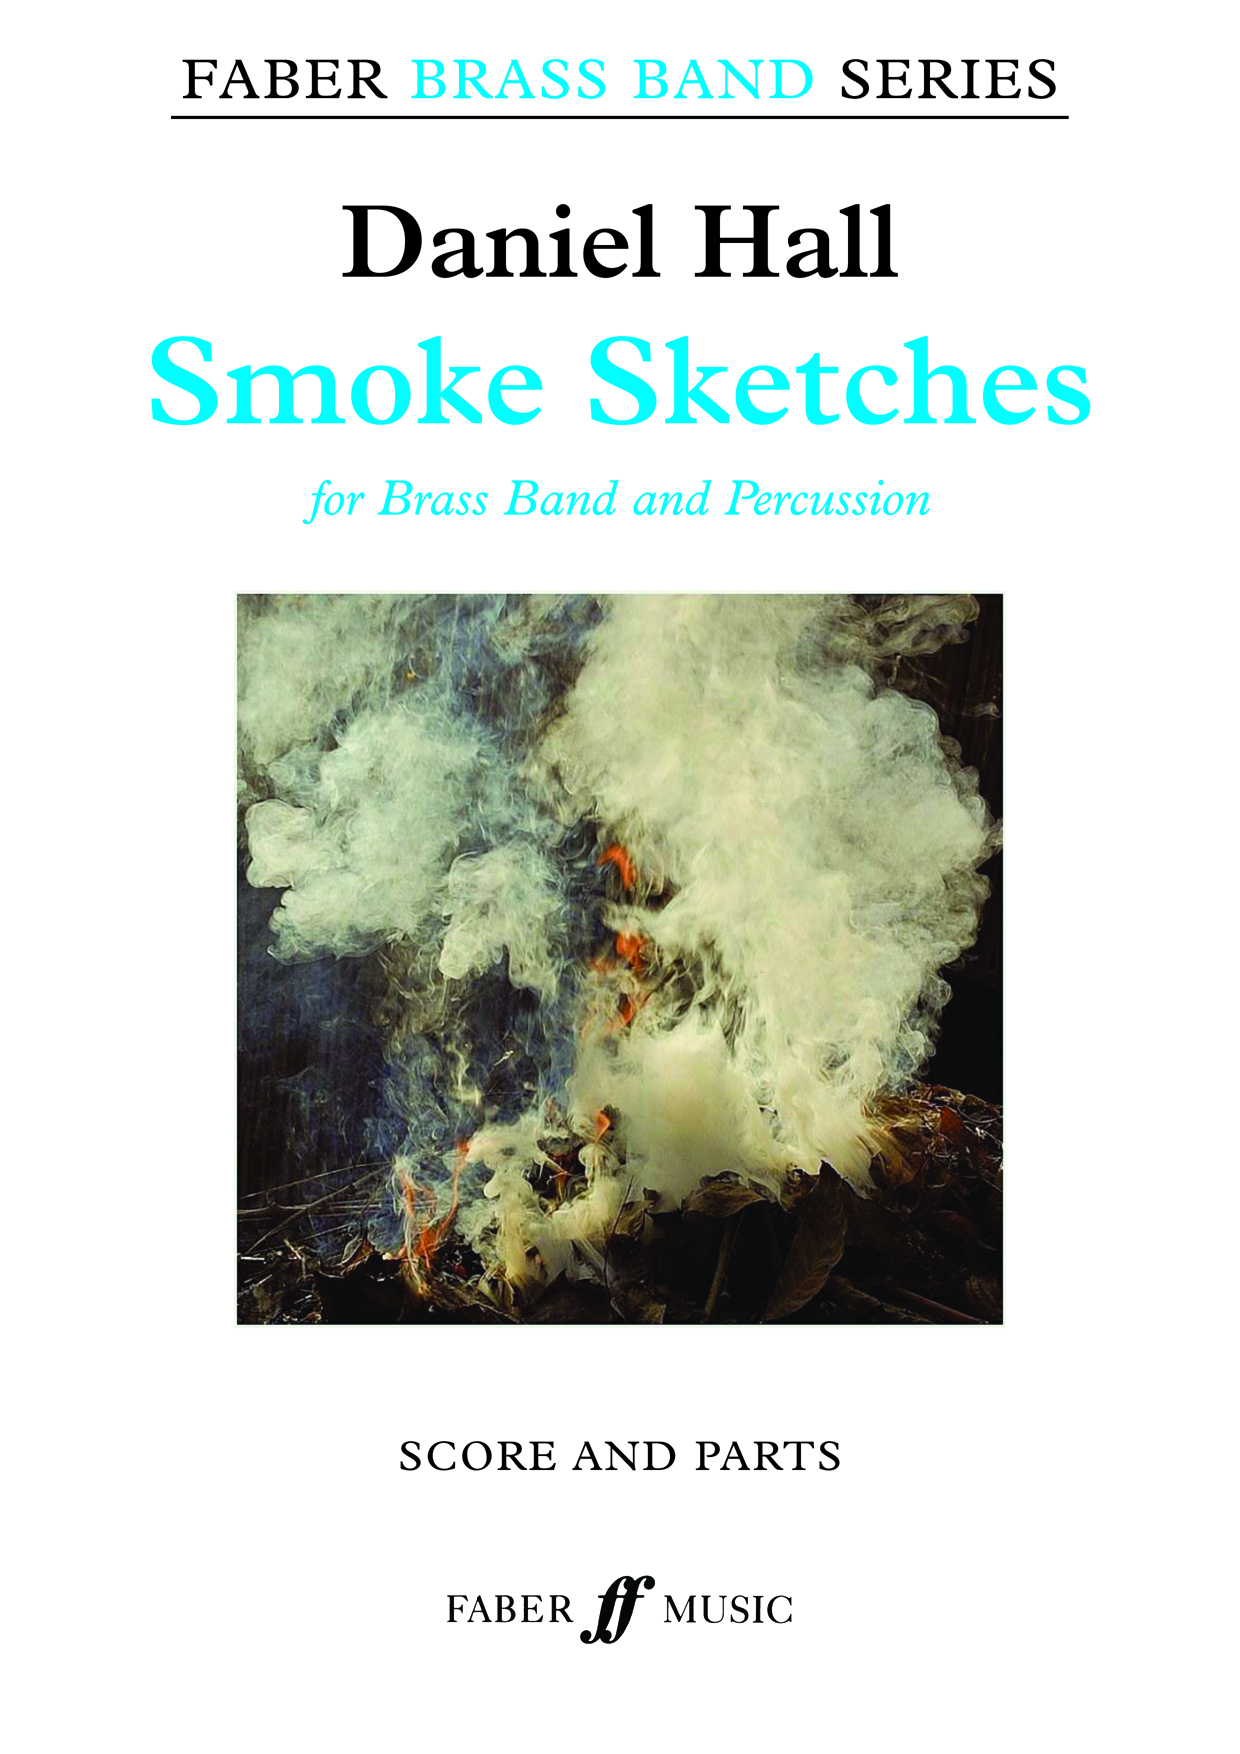 Hall Smoke Sketches Brass Band & Perc Sc & Pts Sheet Music Songbook